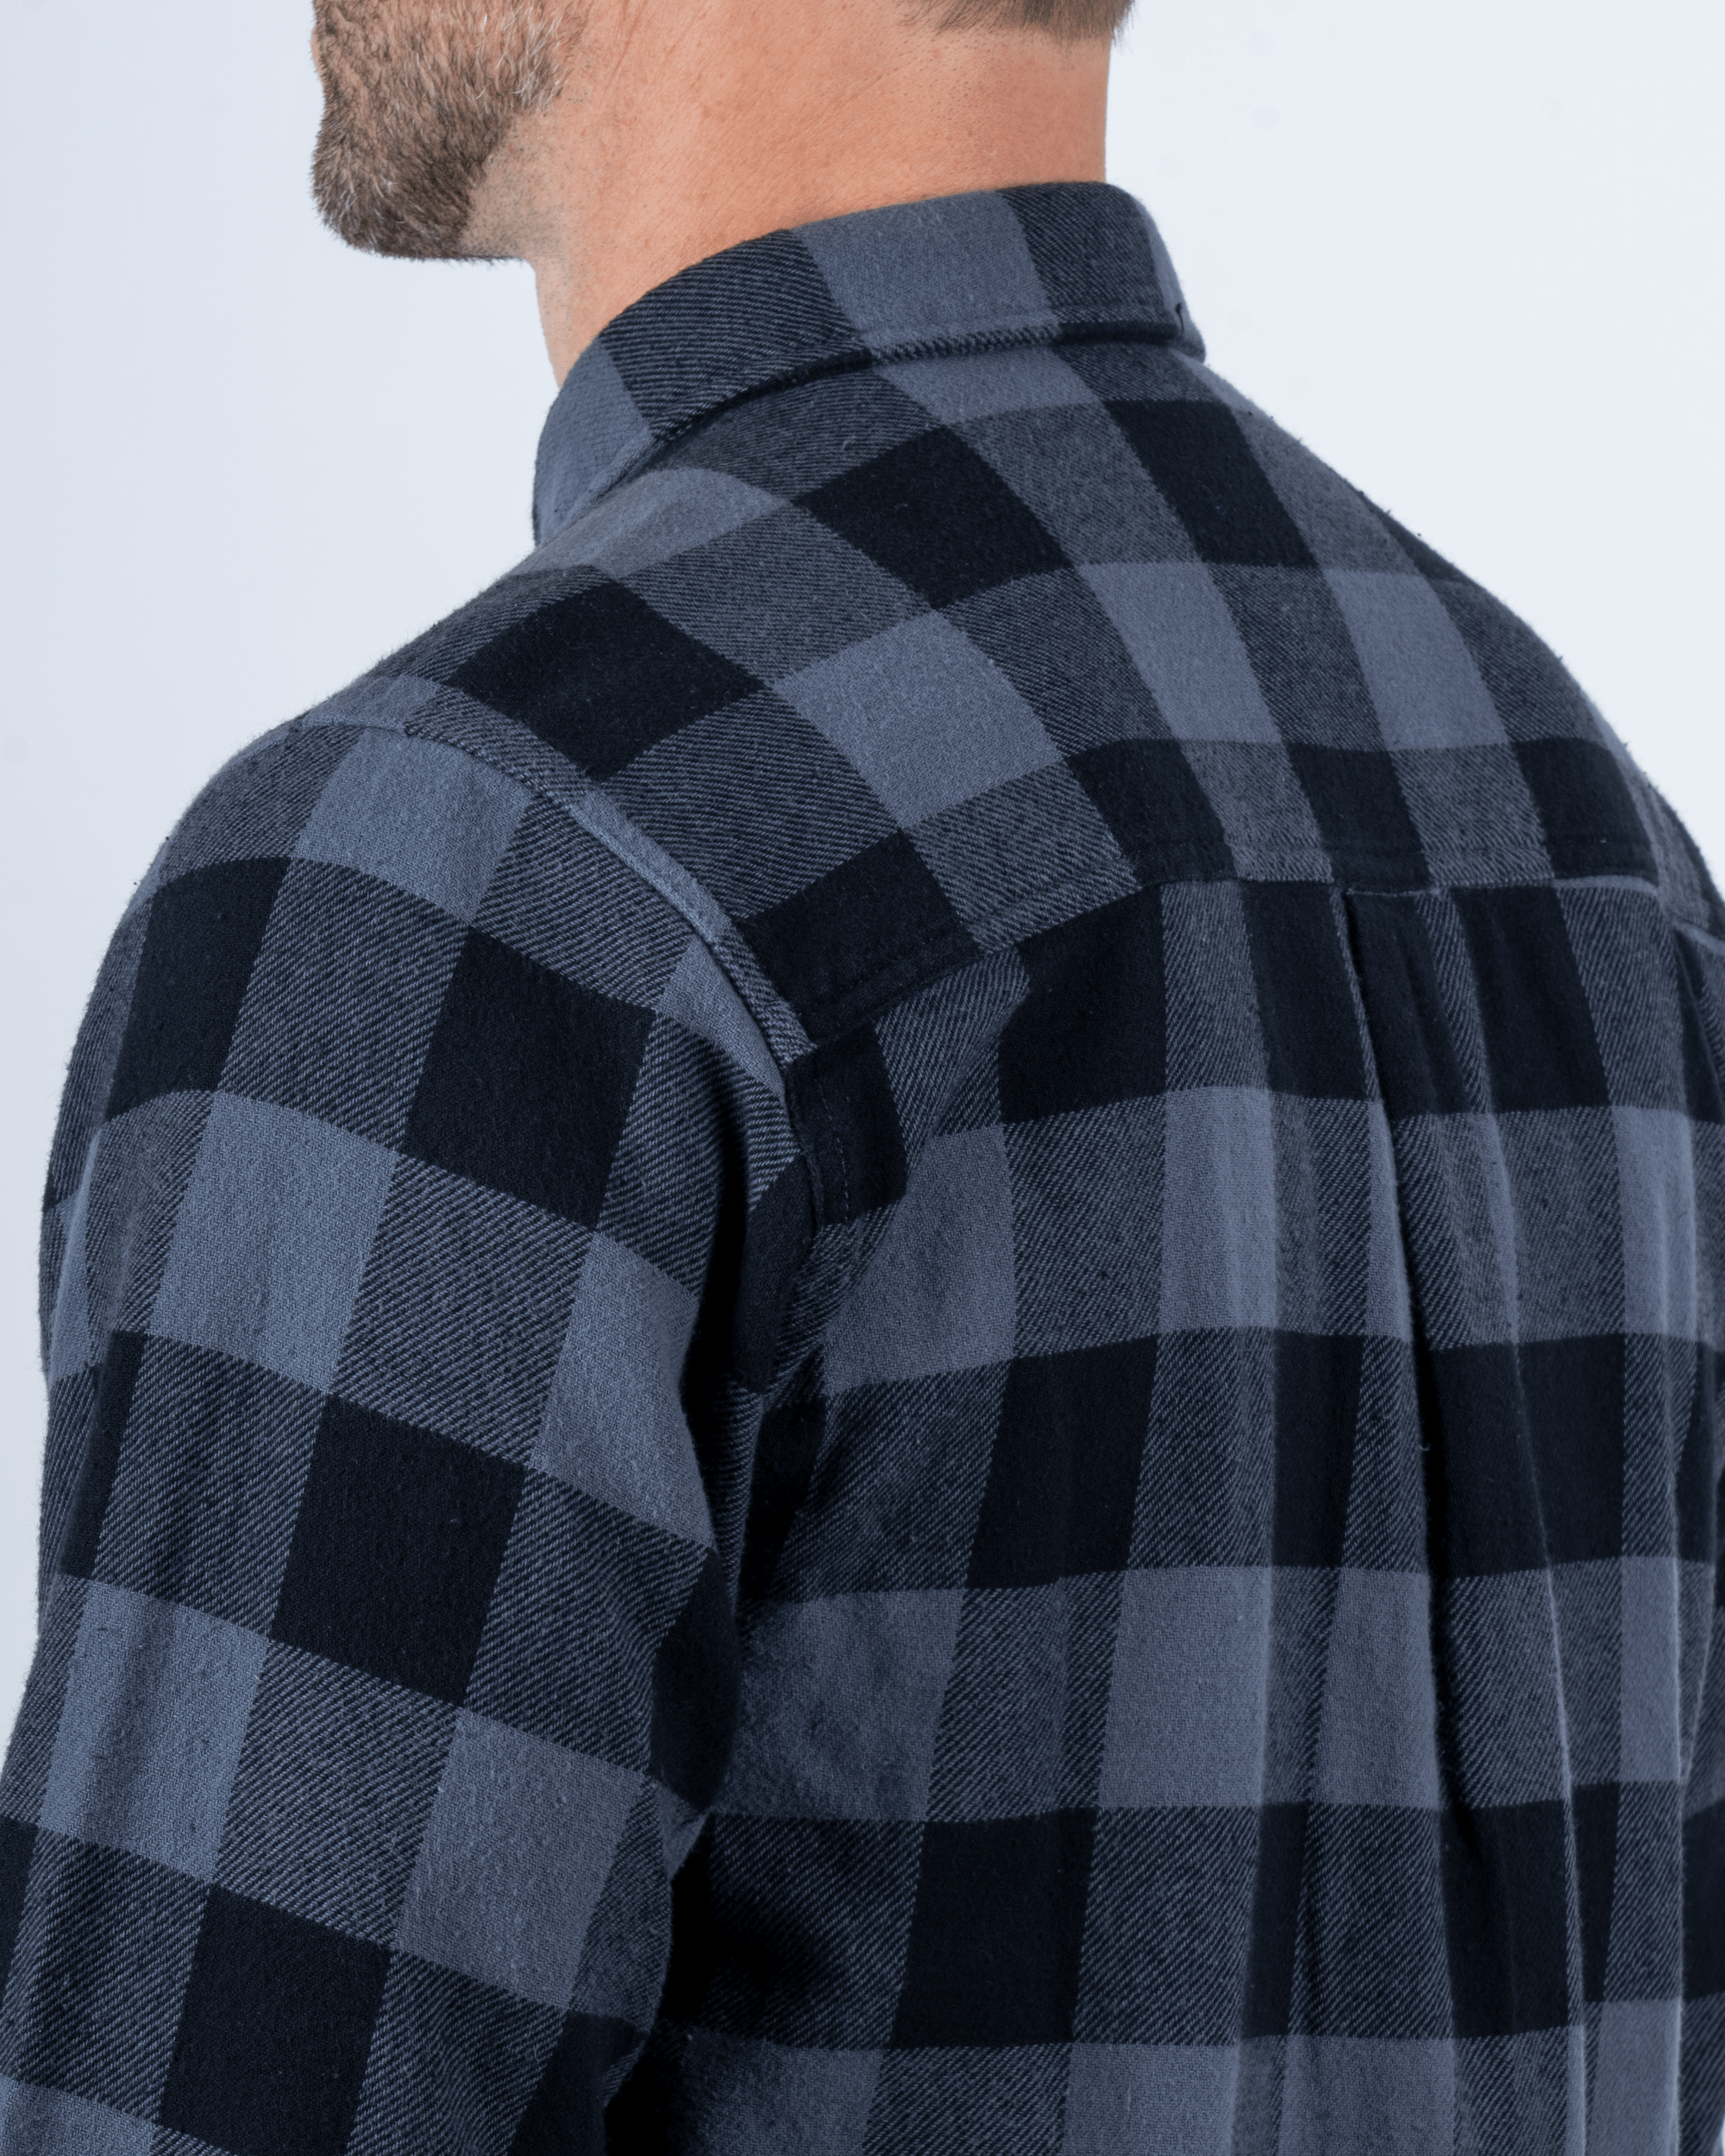 Foreign Rider Co Organic Cotton Black Flannel Plaid 01 Long Sleeve Button Up Shirt Back Shoulder and Collar Detail